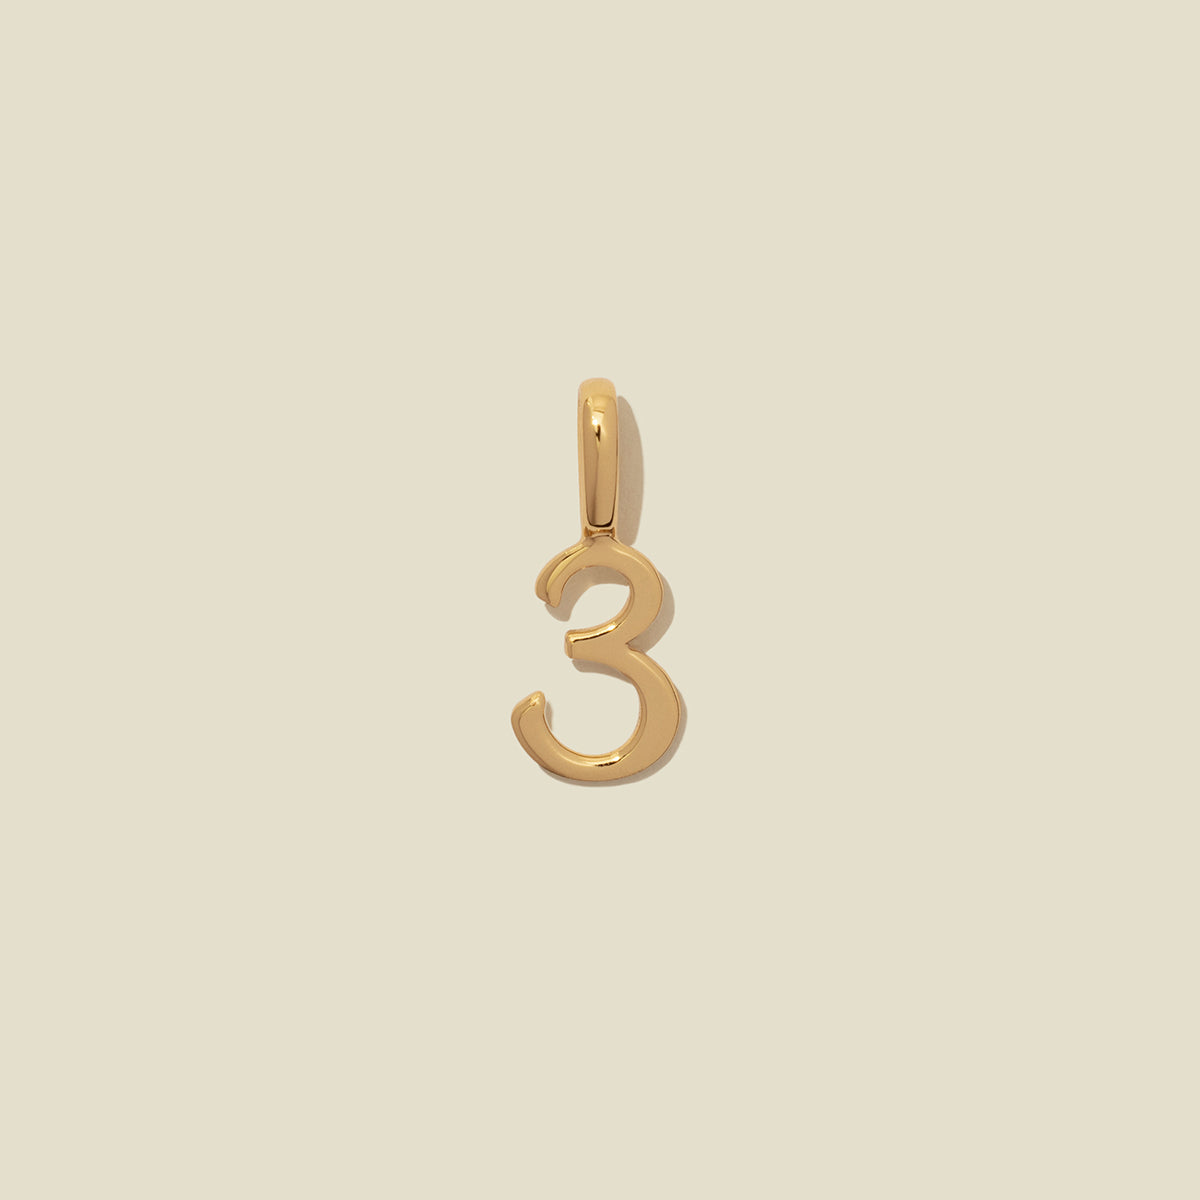 Number 3 Charm Gold Vermeil Add Ons